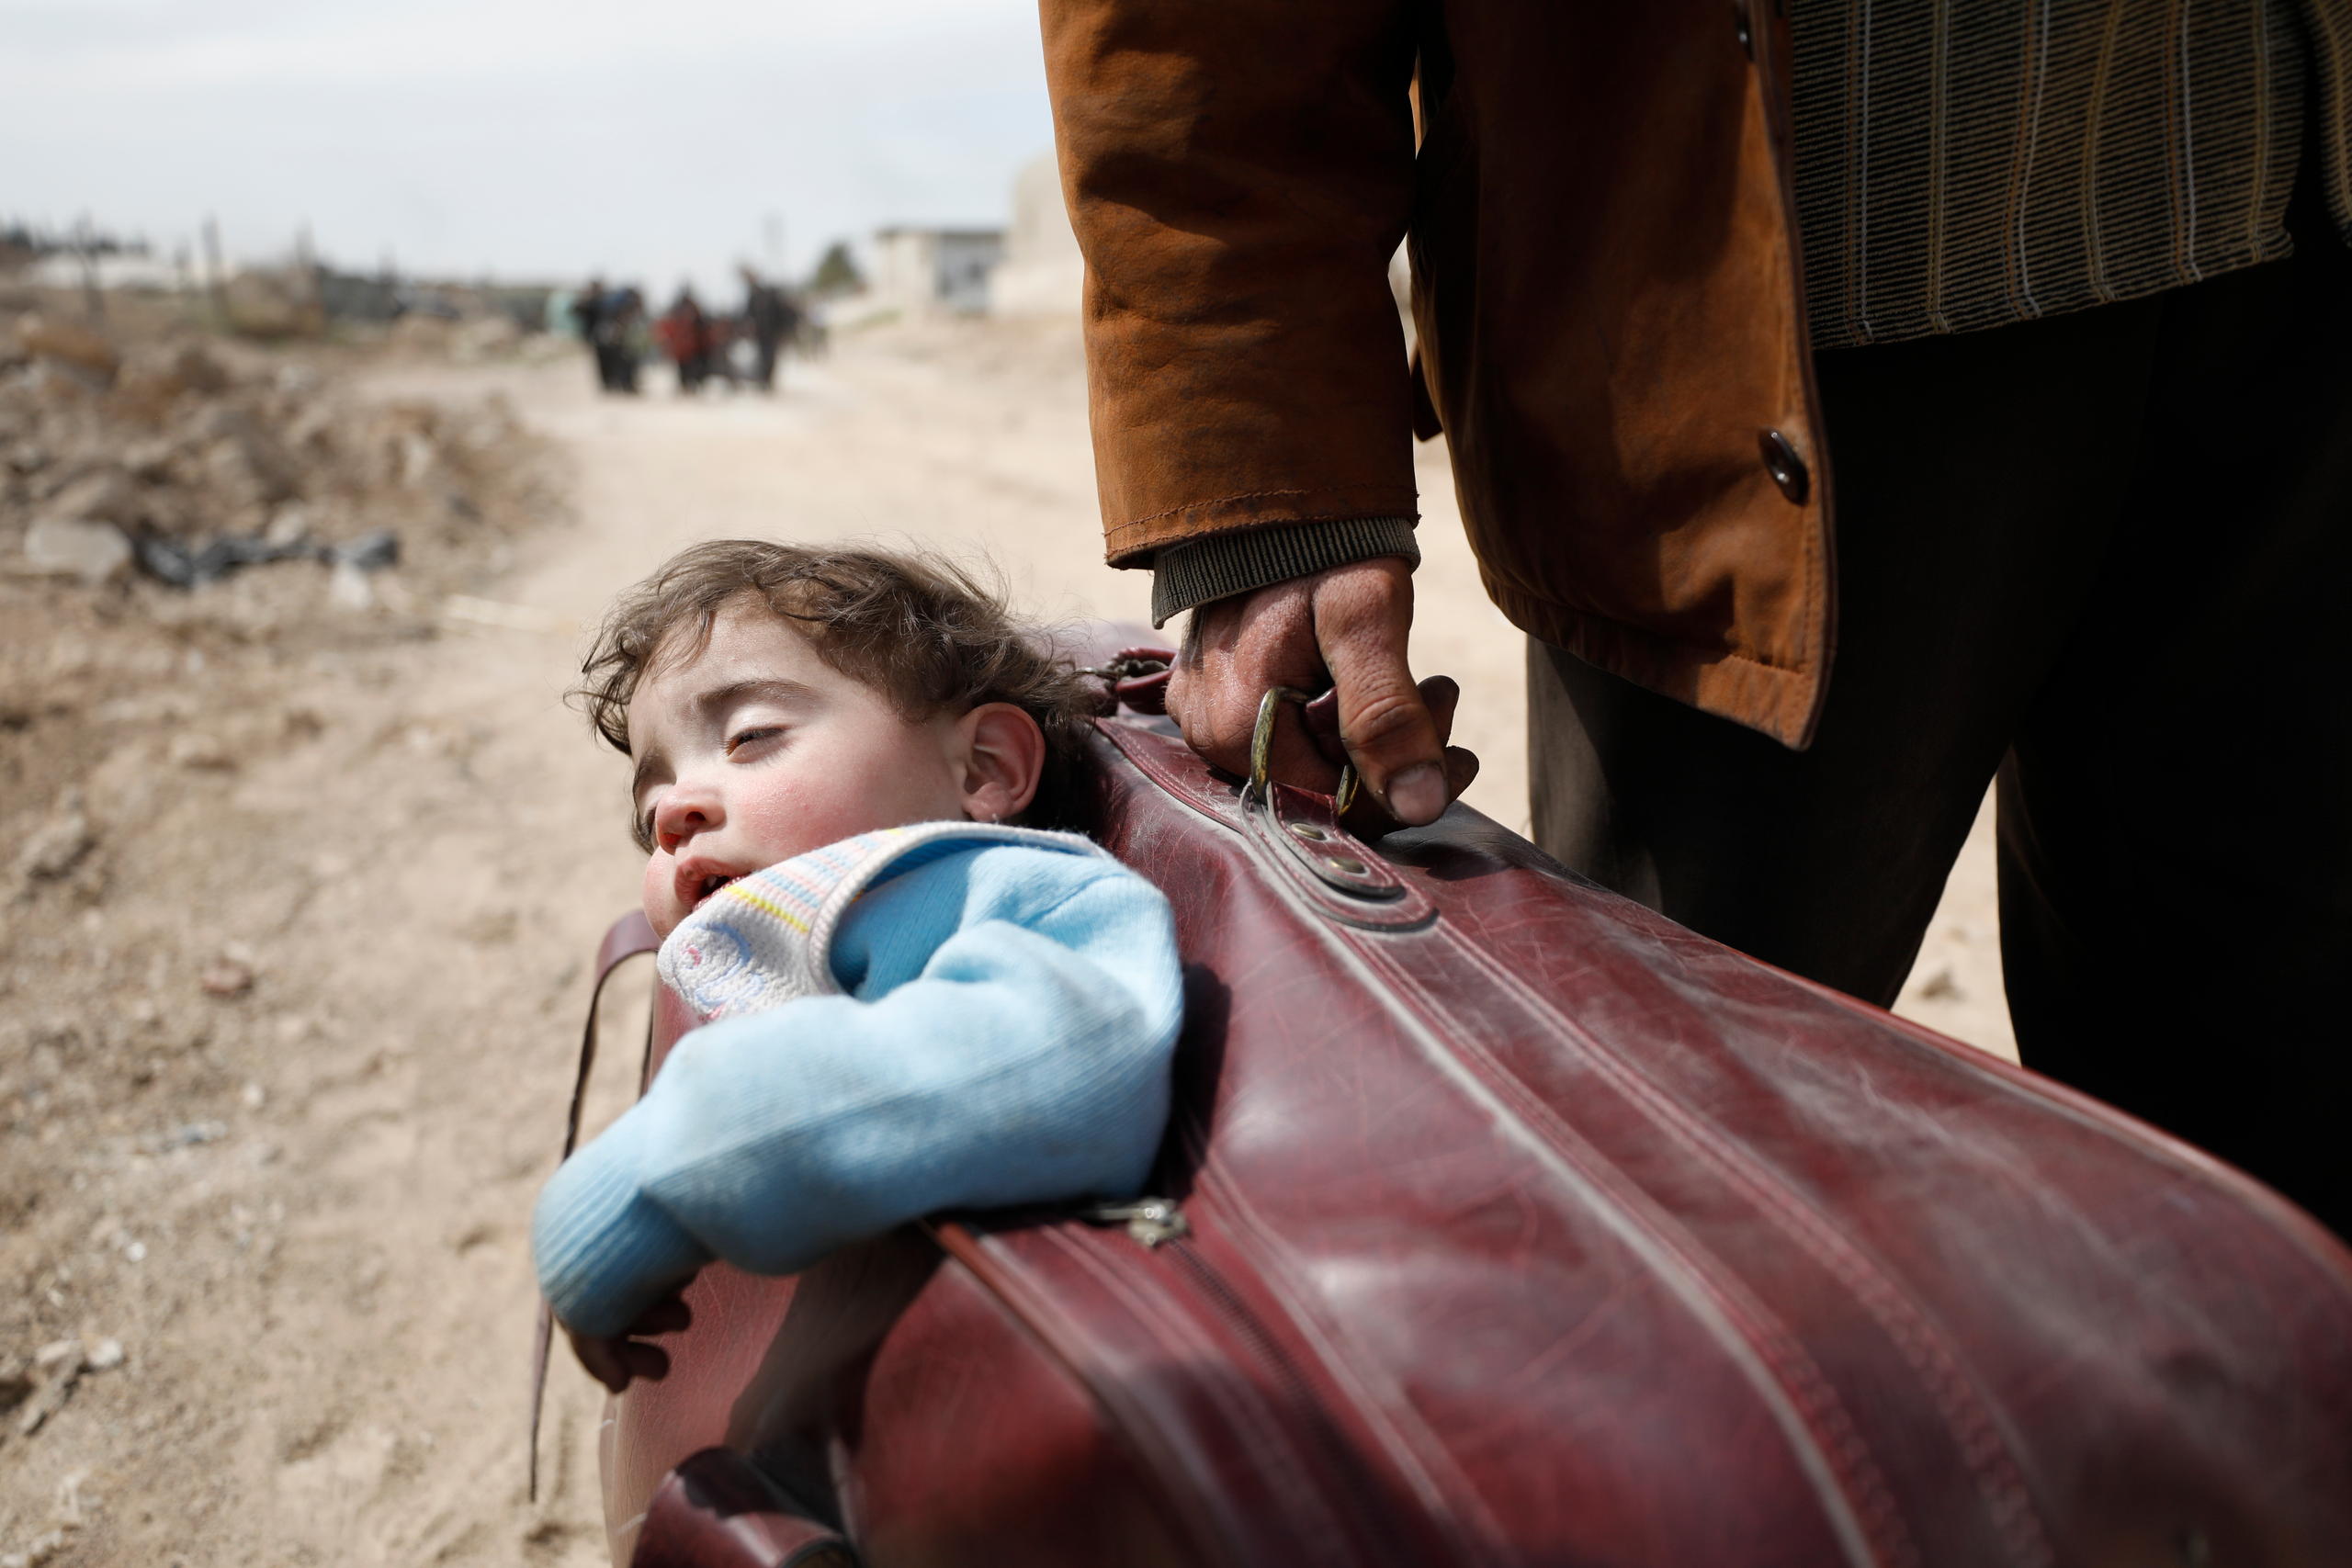 A child carried in a suitcase in Syria